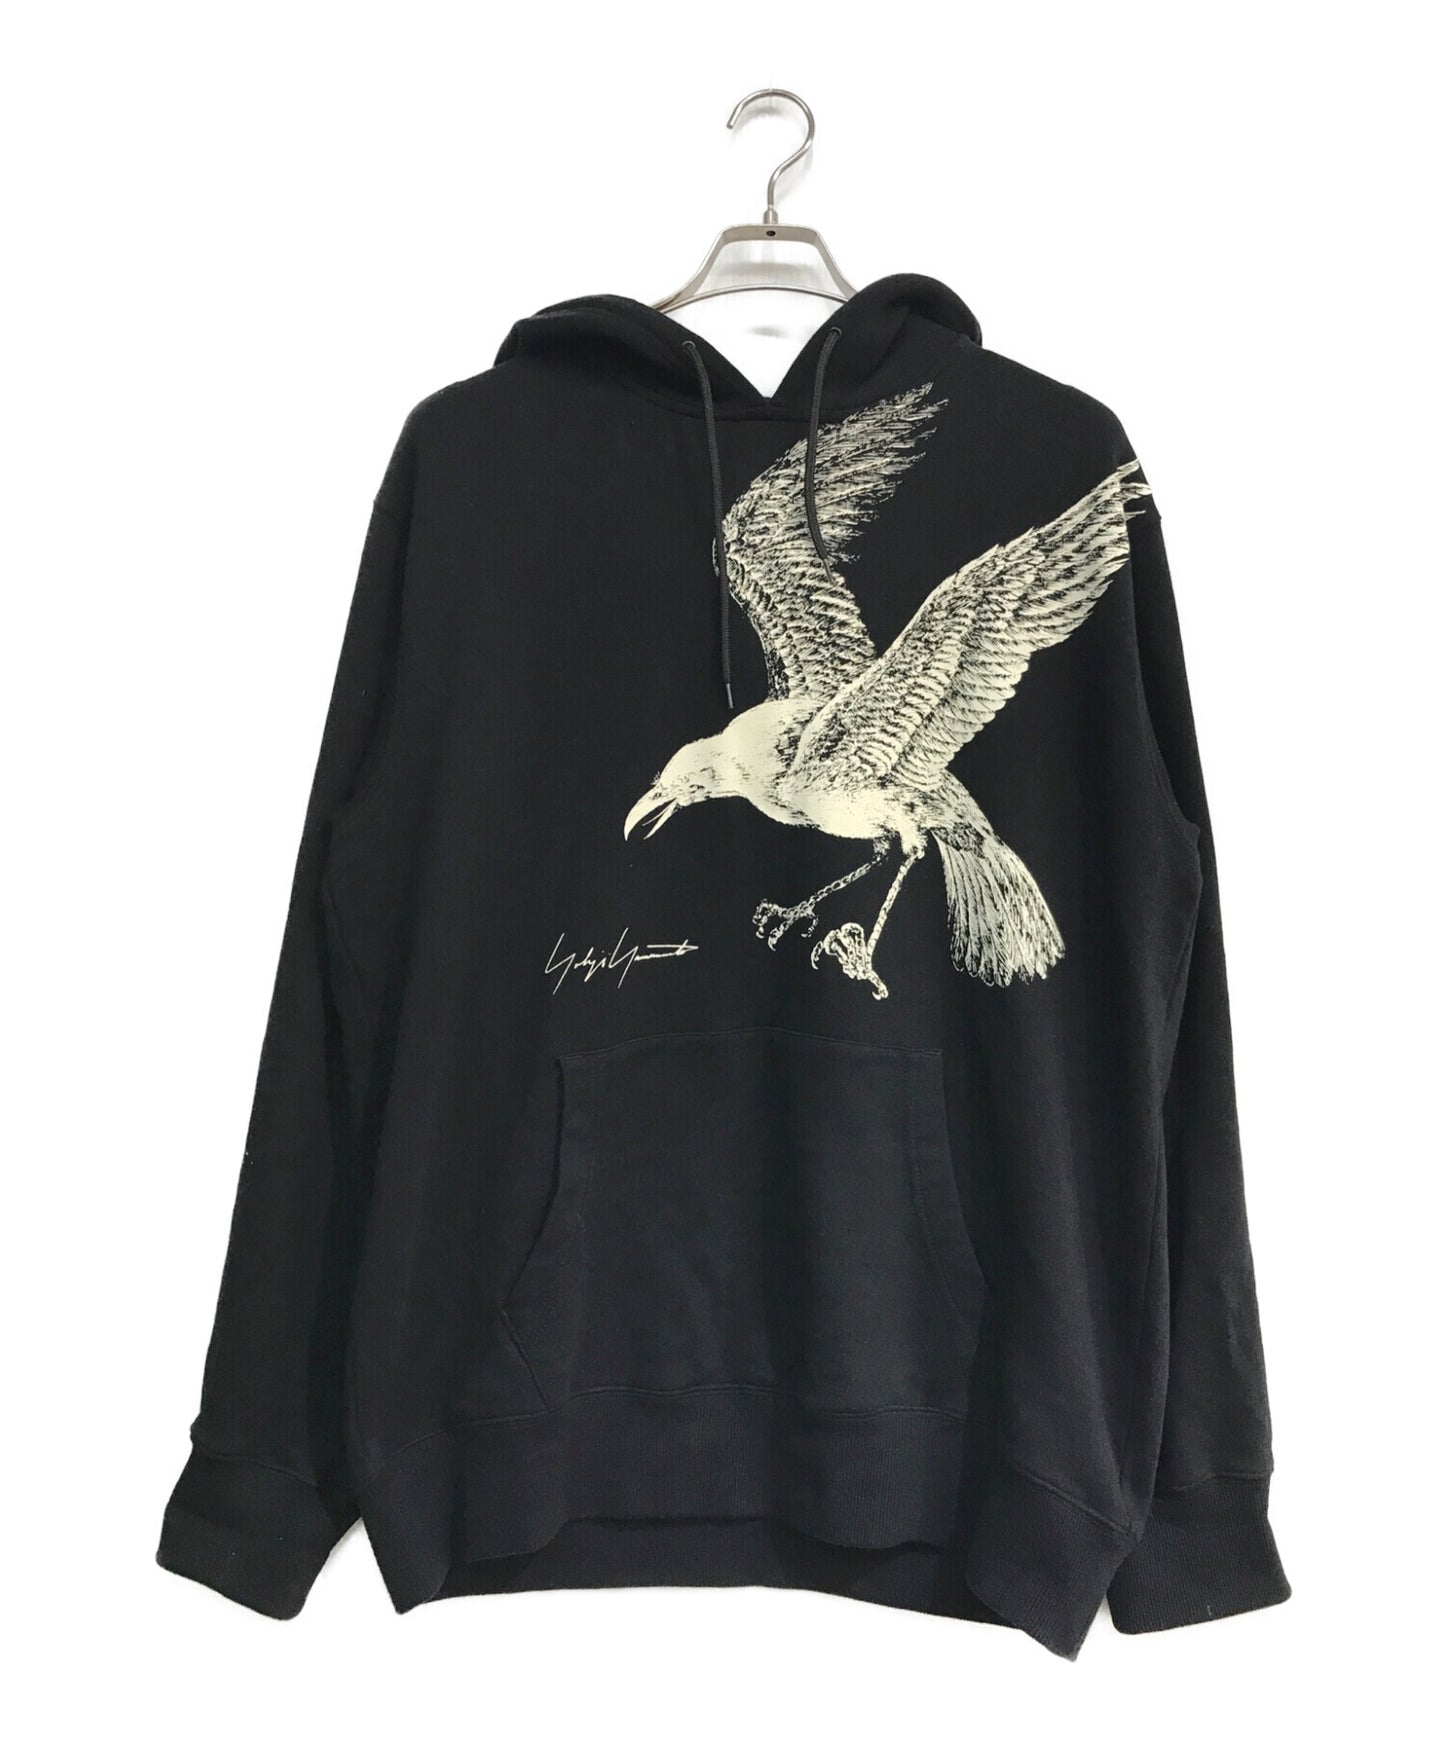 Yohji Yamamoto pour homme CROW PRINT SWEAT PULLOVER HOODIE HG-T97-997 HG-T97-997